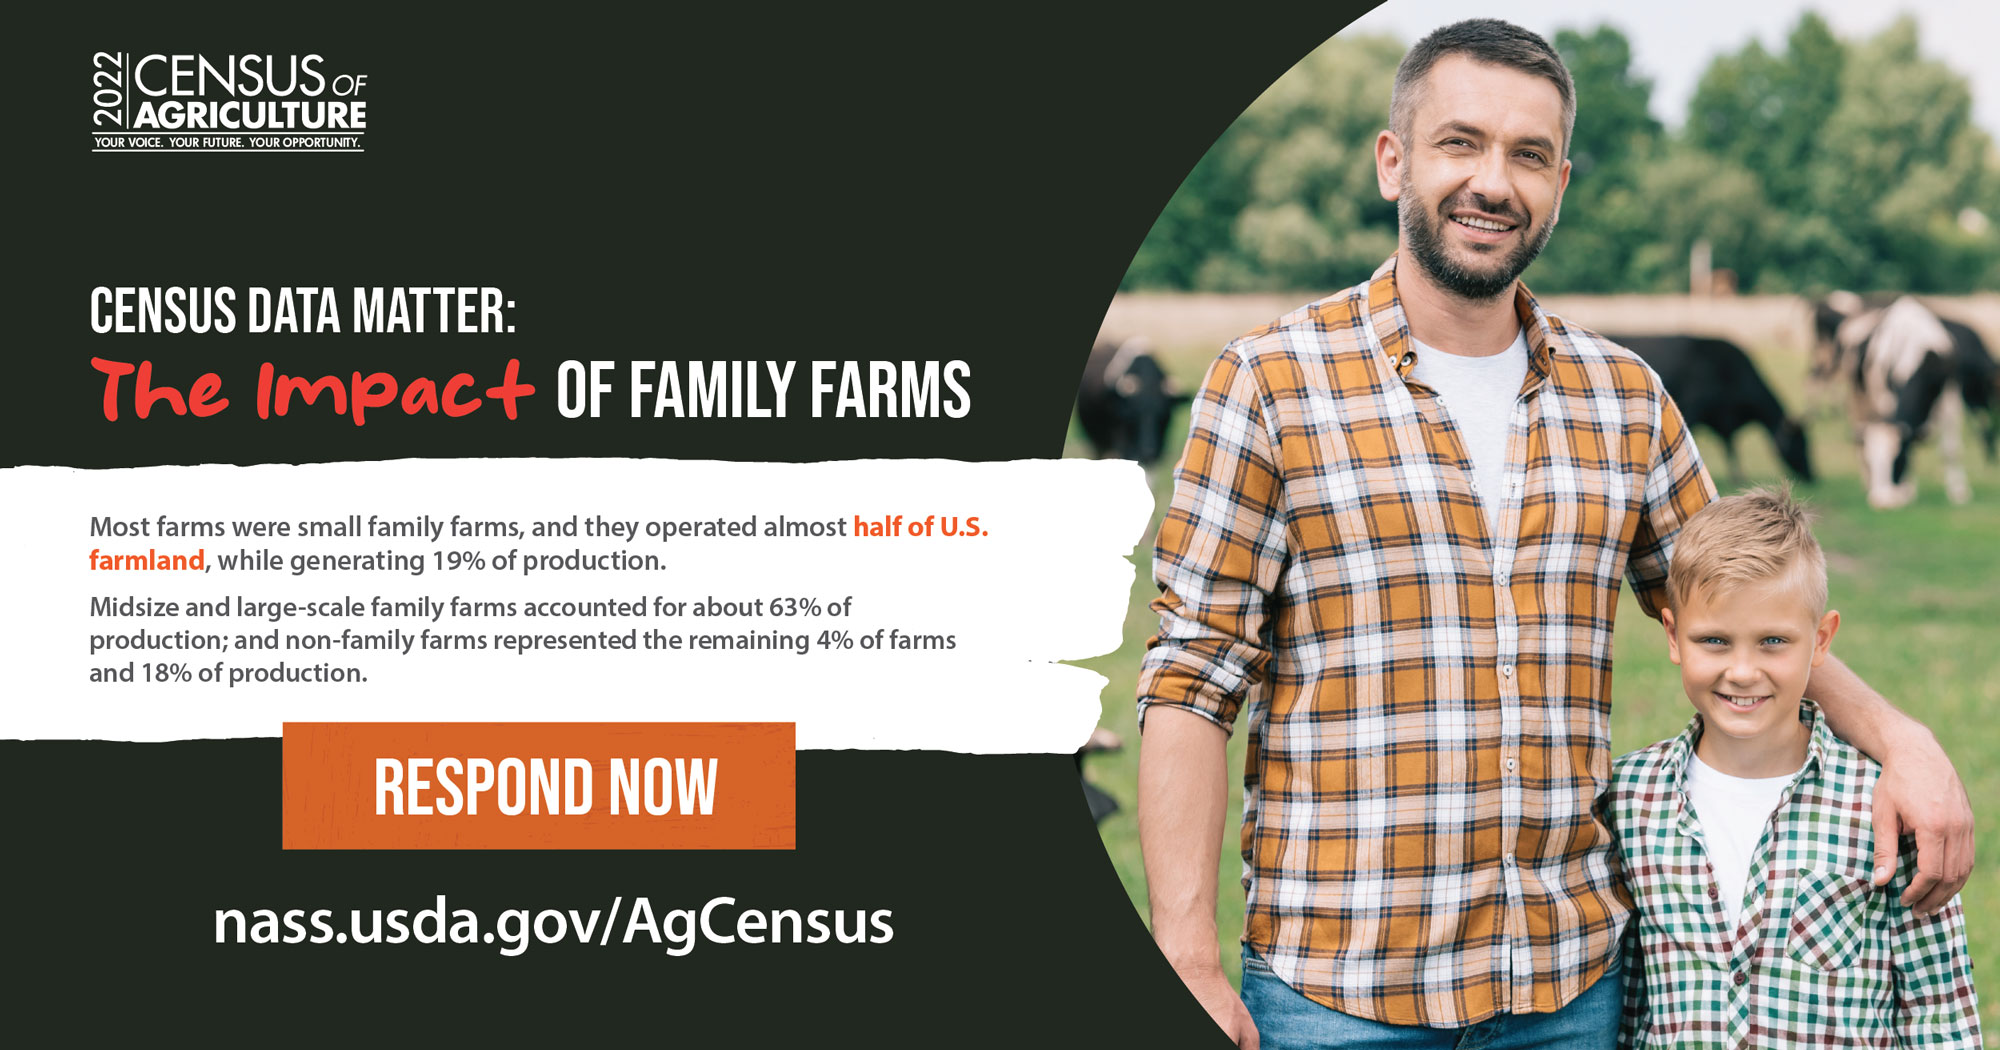 A Census of Ag infographic featuring a father and son with text beside them